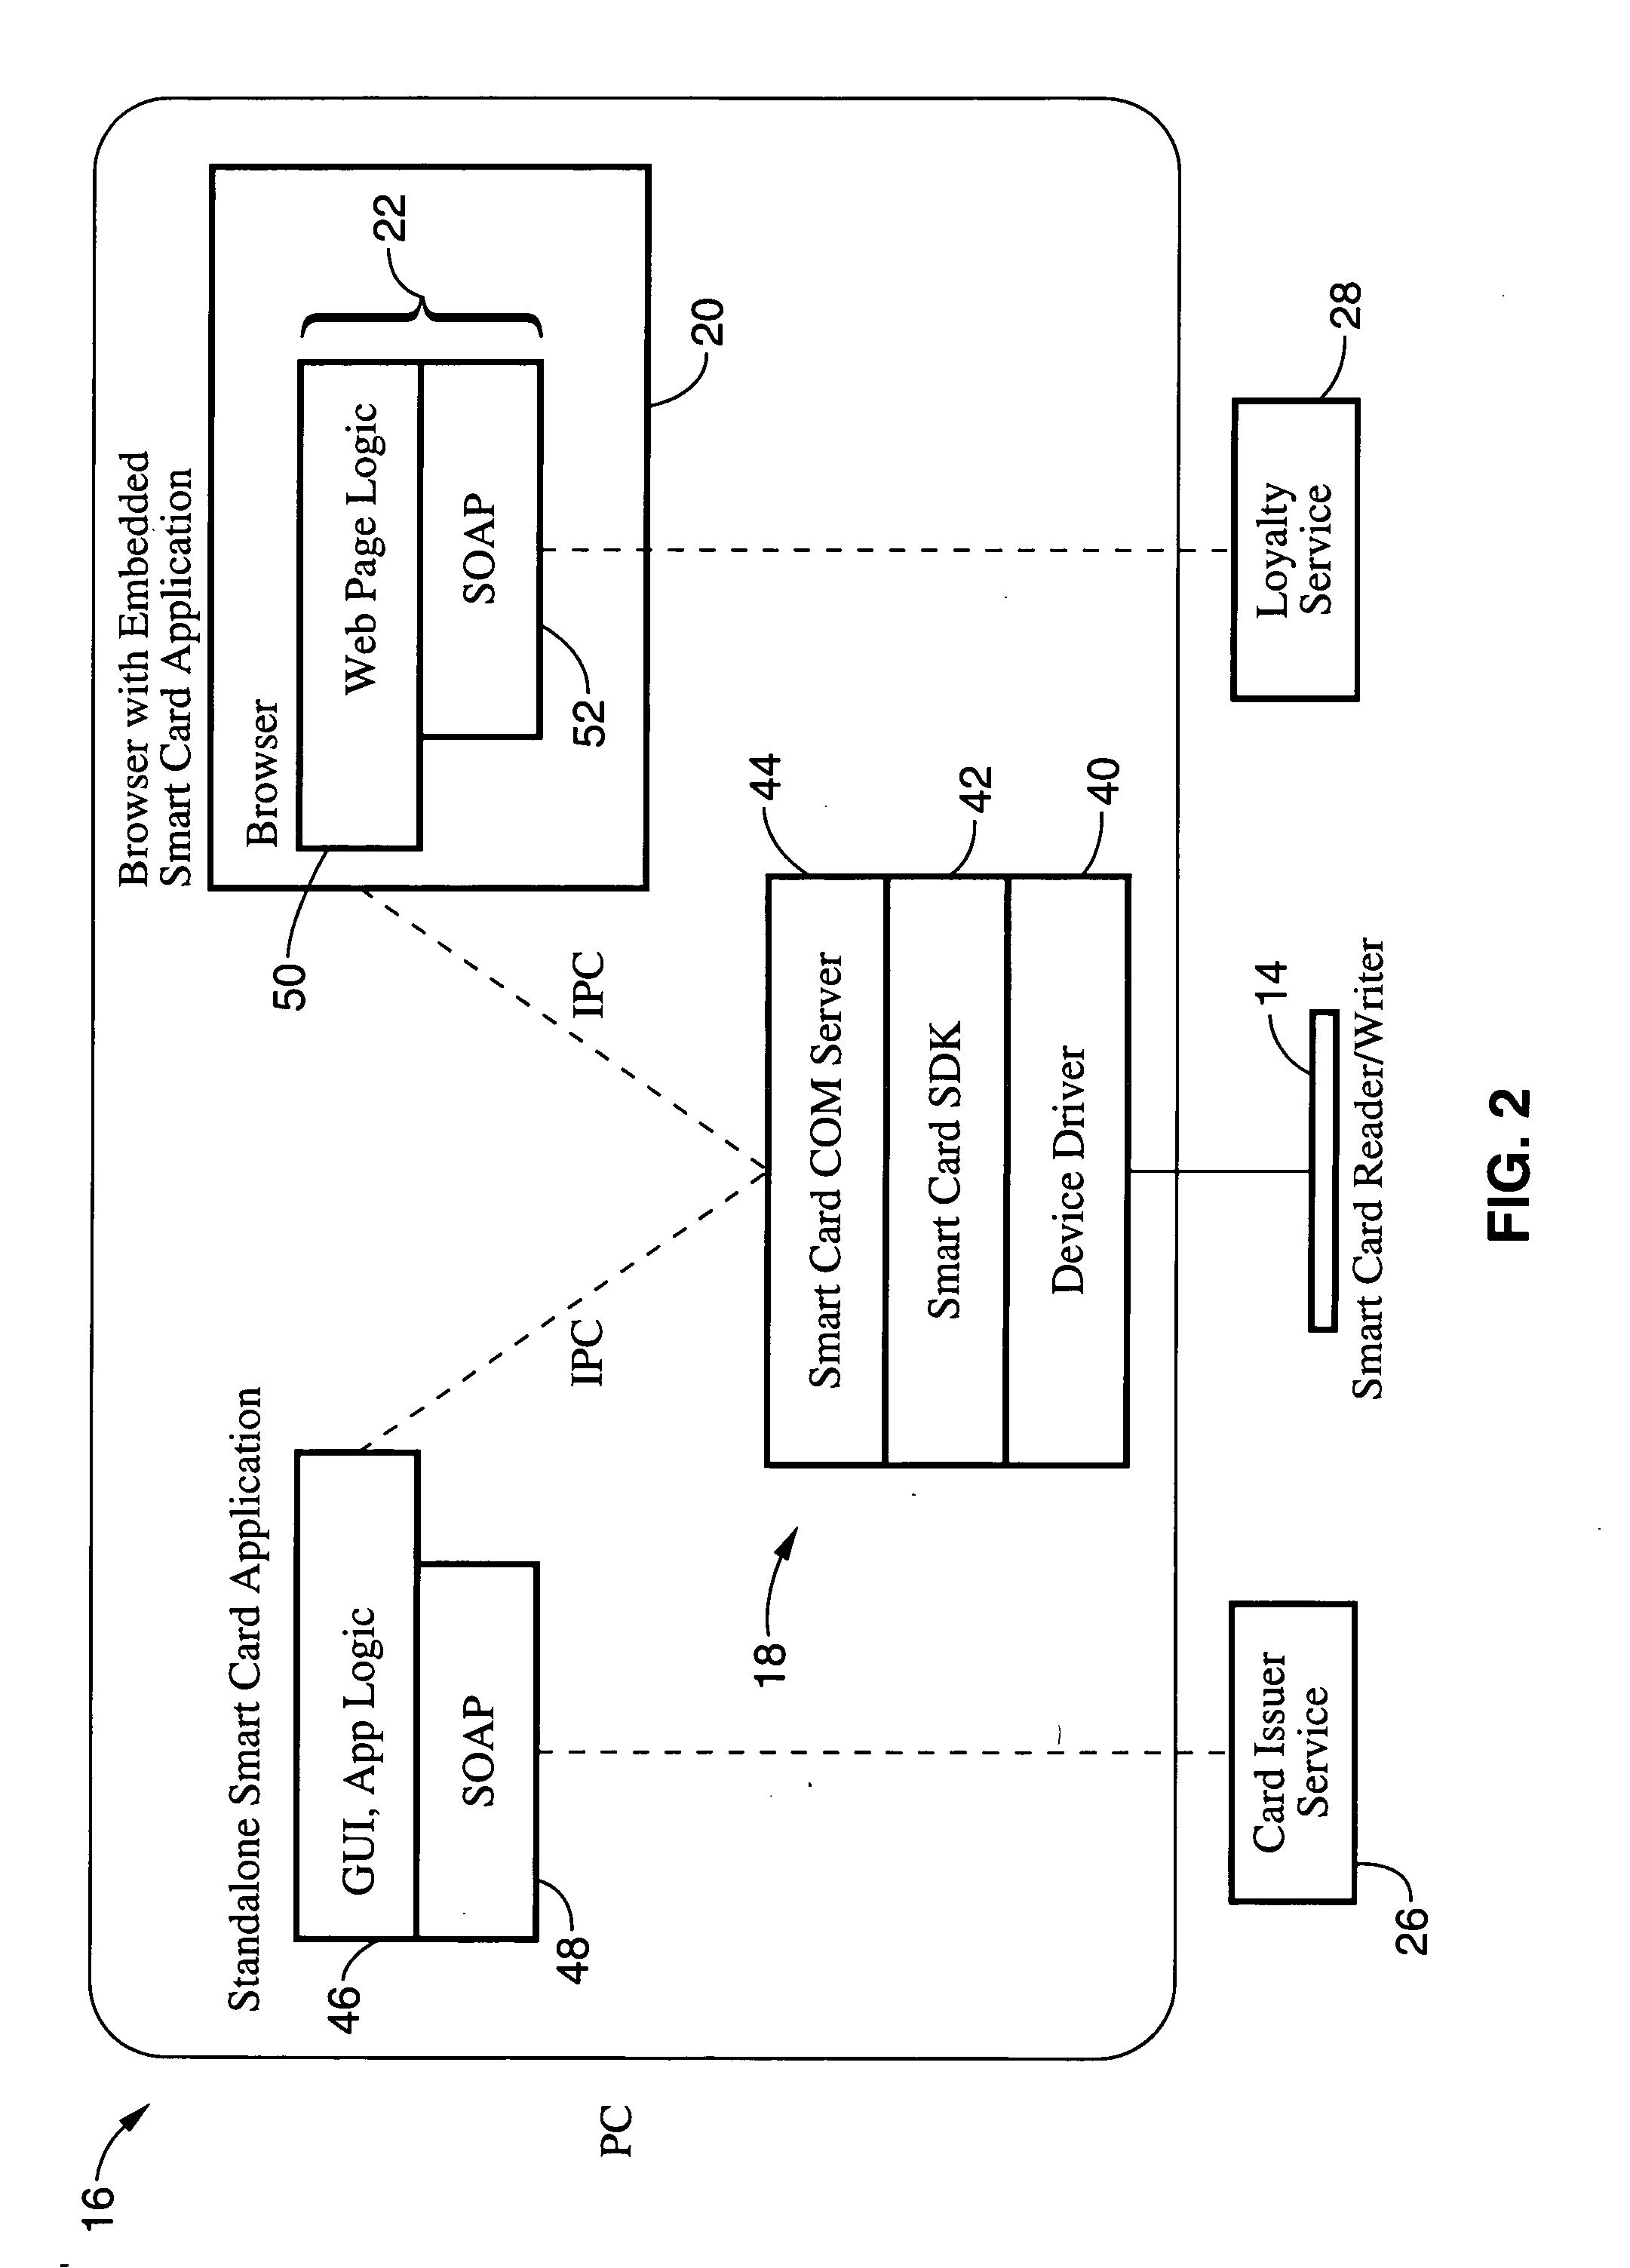 System, apparatus and method for obtaining one-time credit card numbers using a smart card